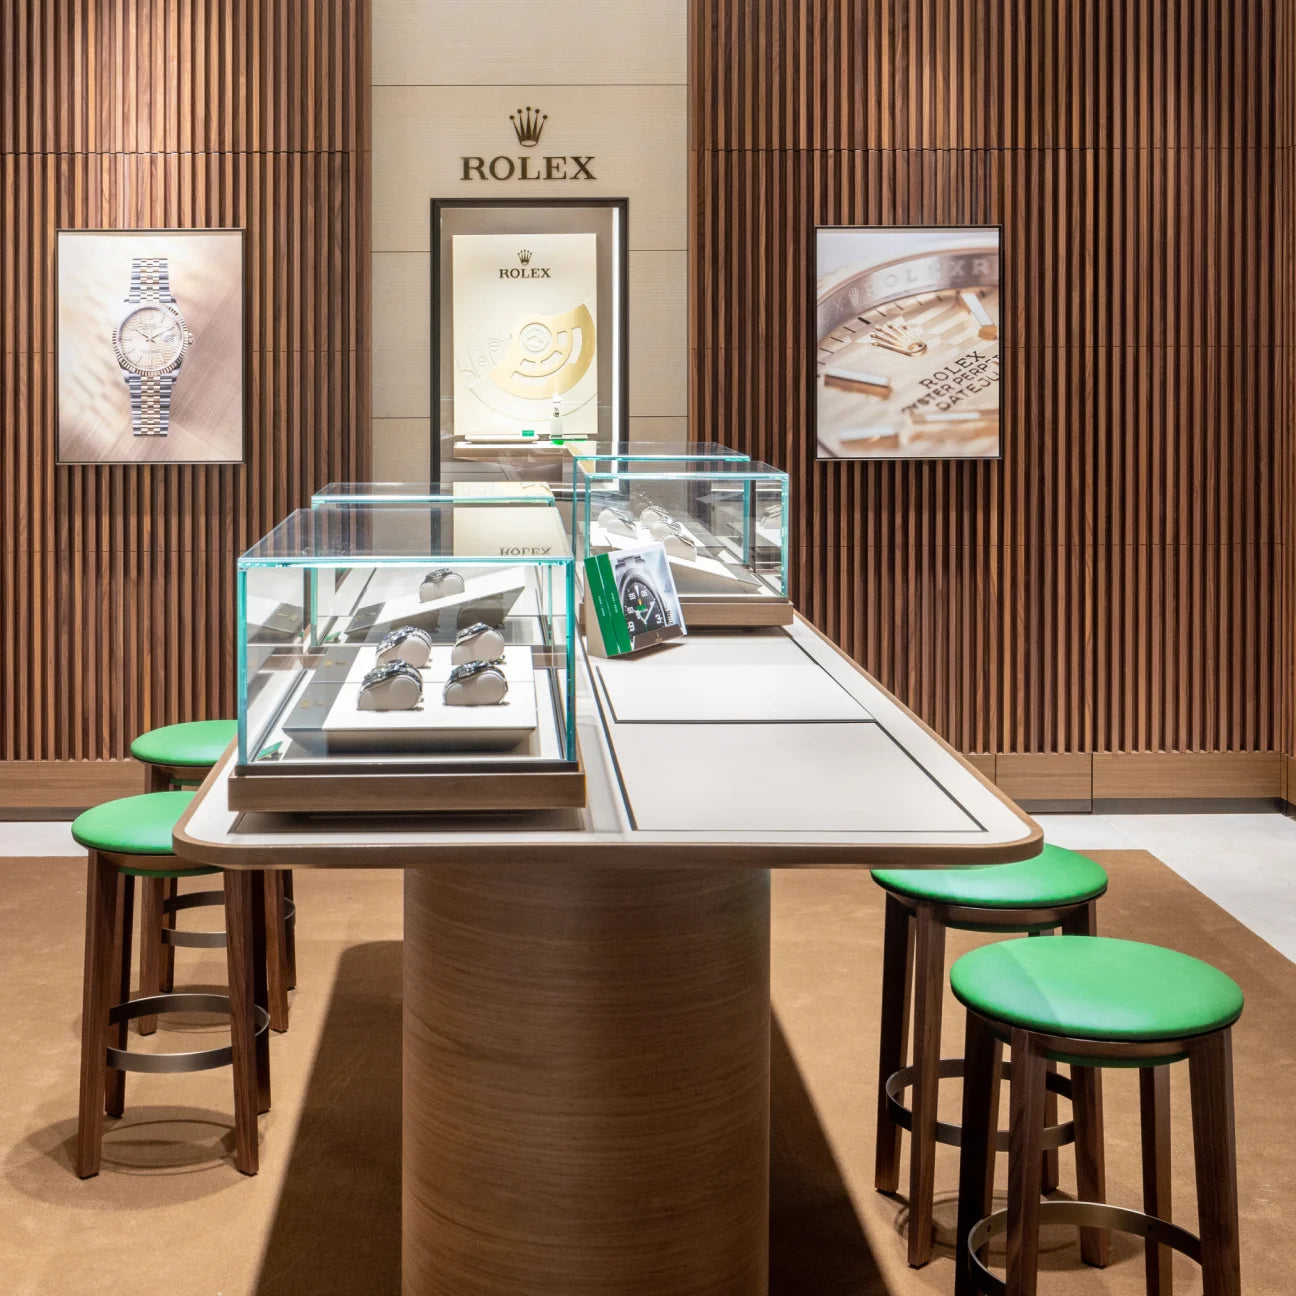 Our Rolex showroom at Orr's Jewelers in Sewickley, PA